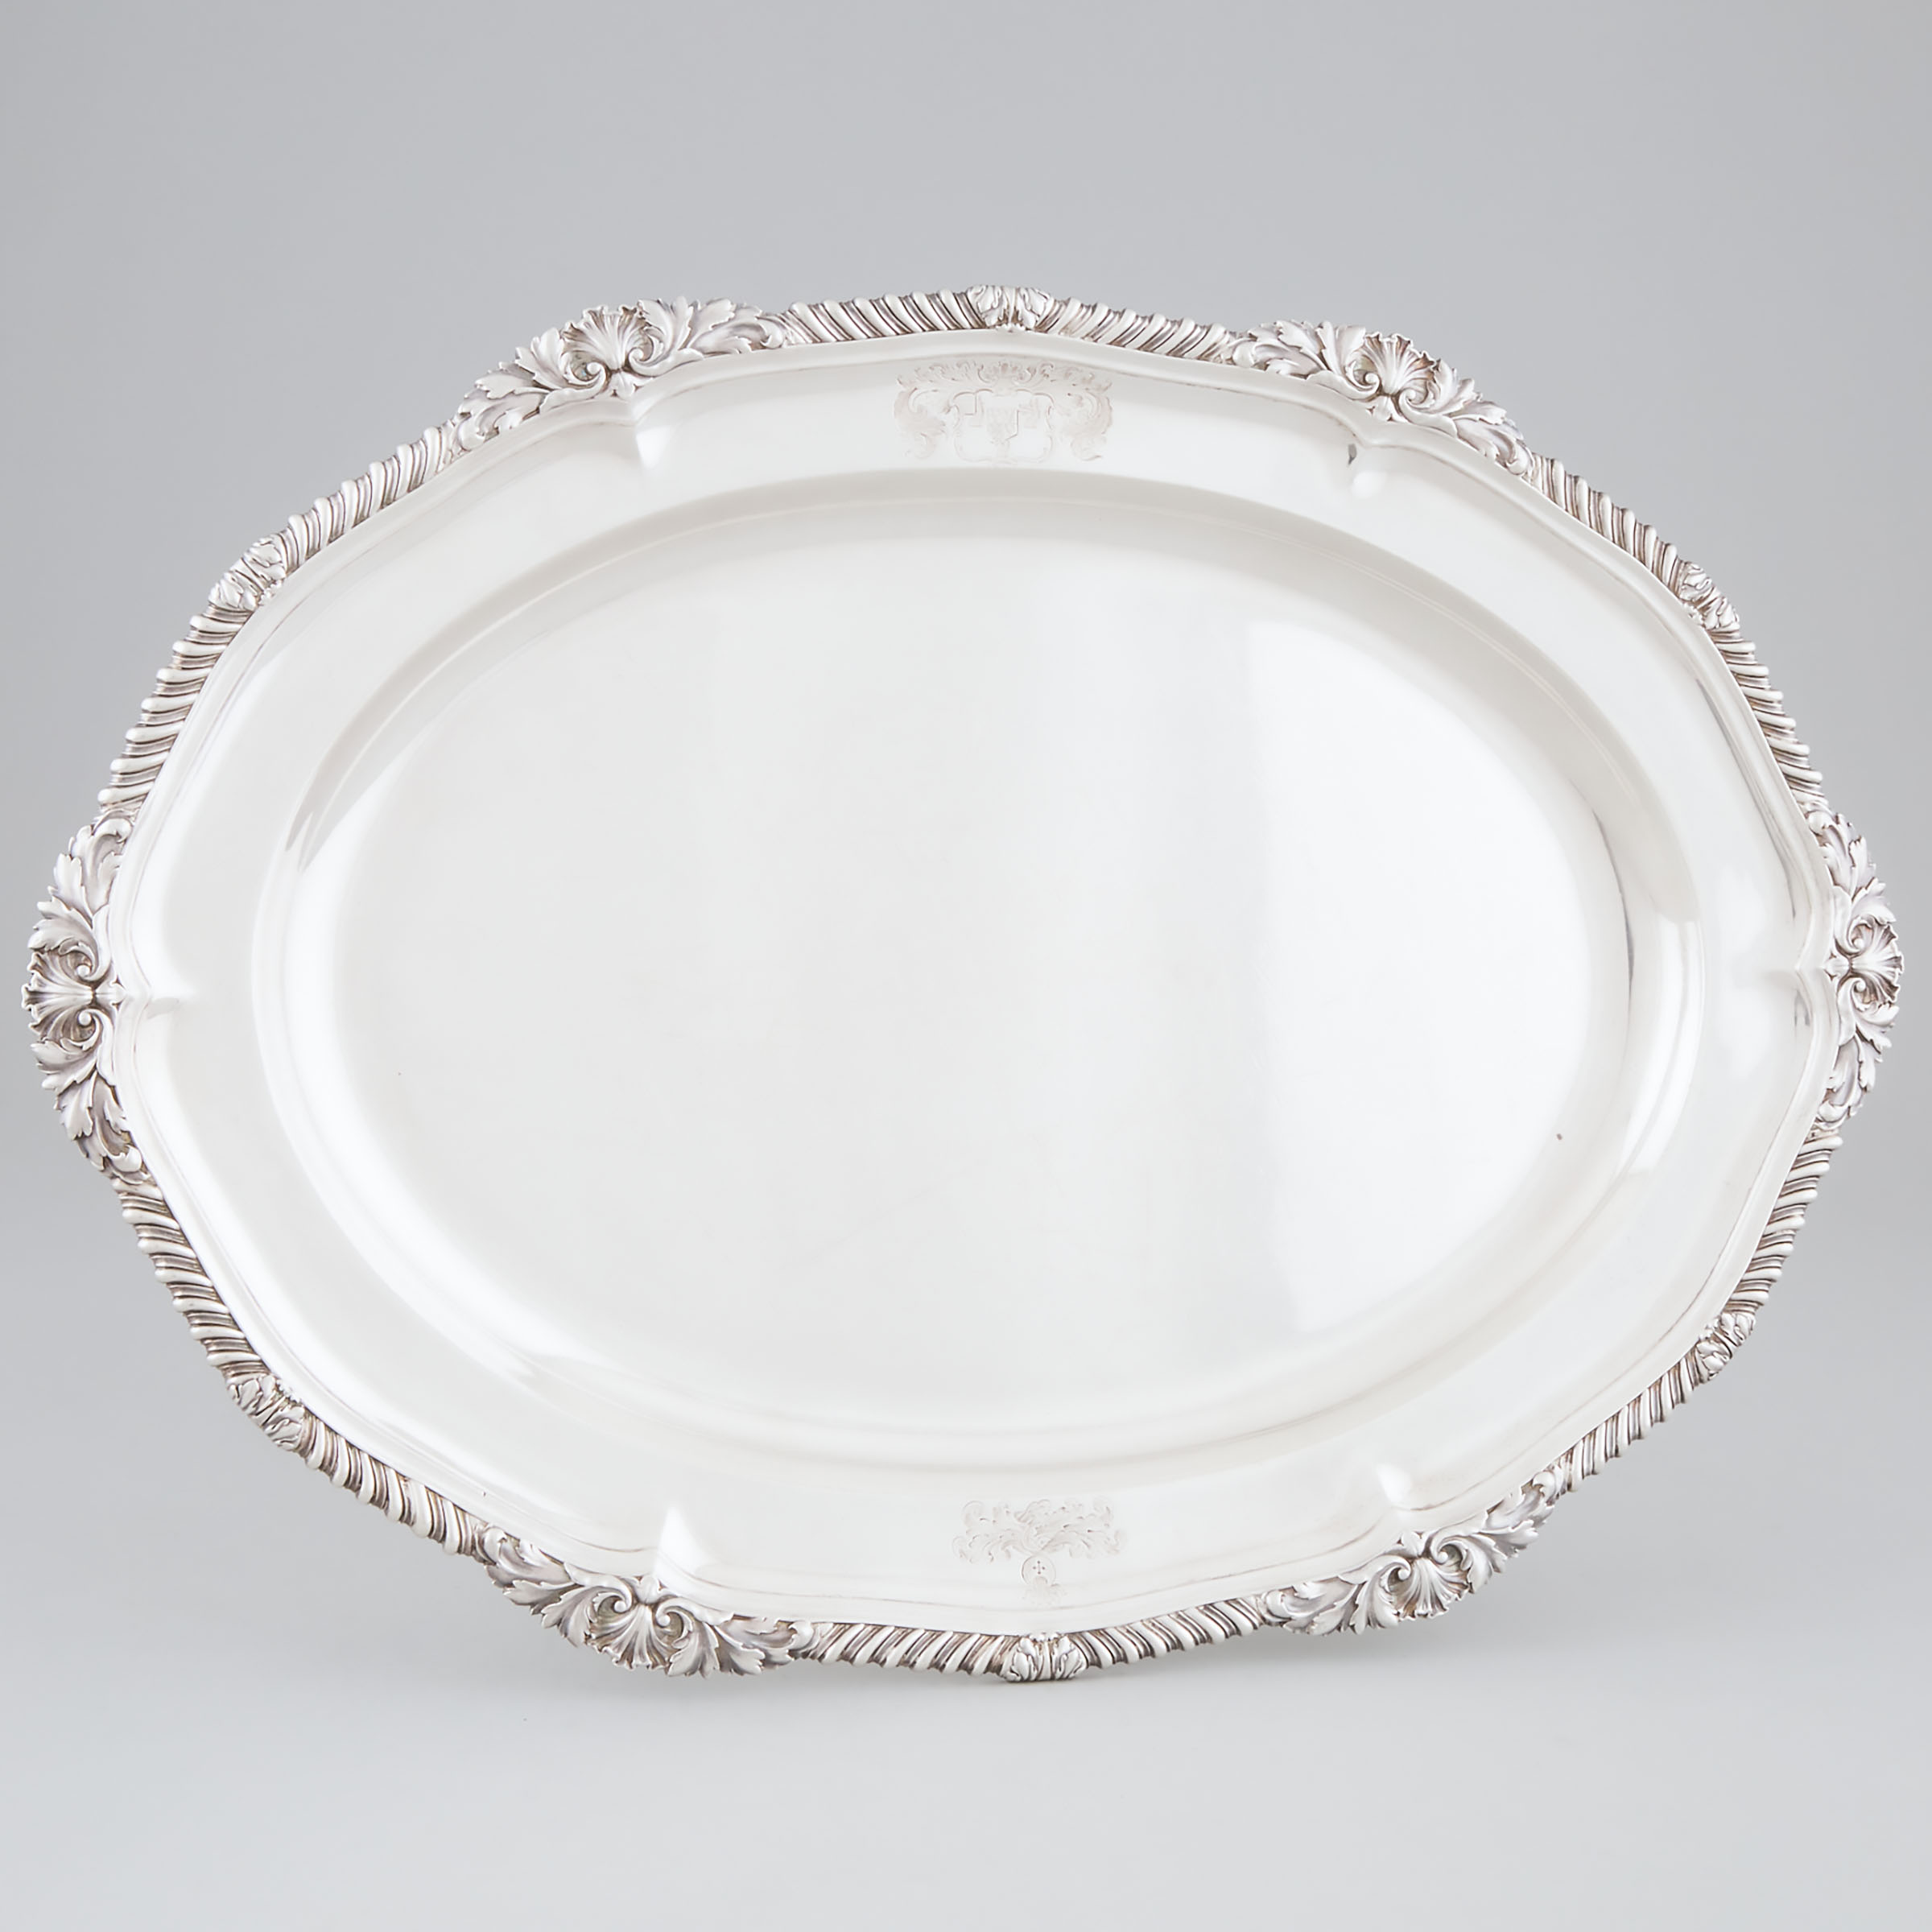 George IV Silver Shaped Oval Platter  2a55f0